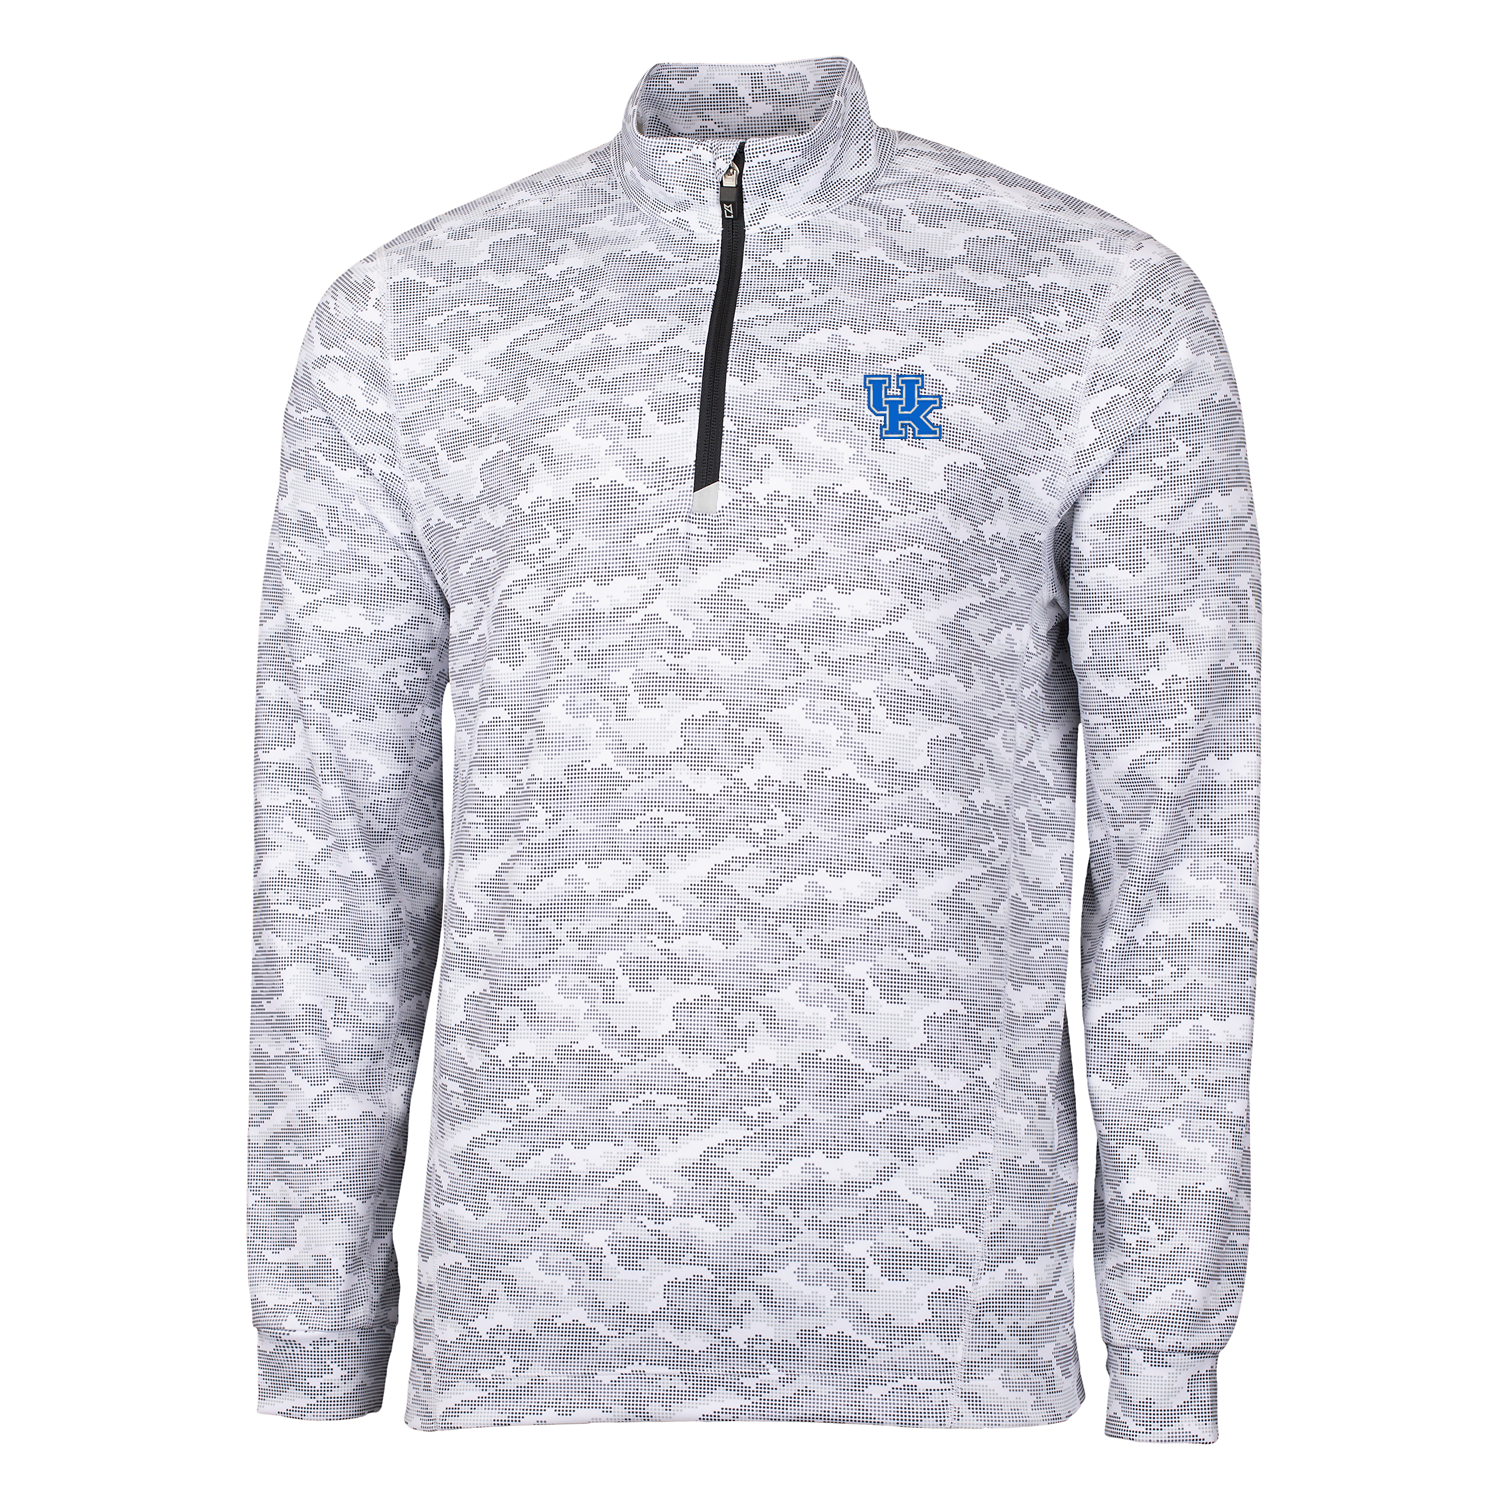 University of Kentucky Traverse Camo Print Stretch Quarter-Zip Pullover in Charcoal by Cutter & Buck